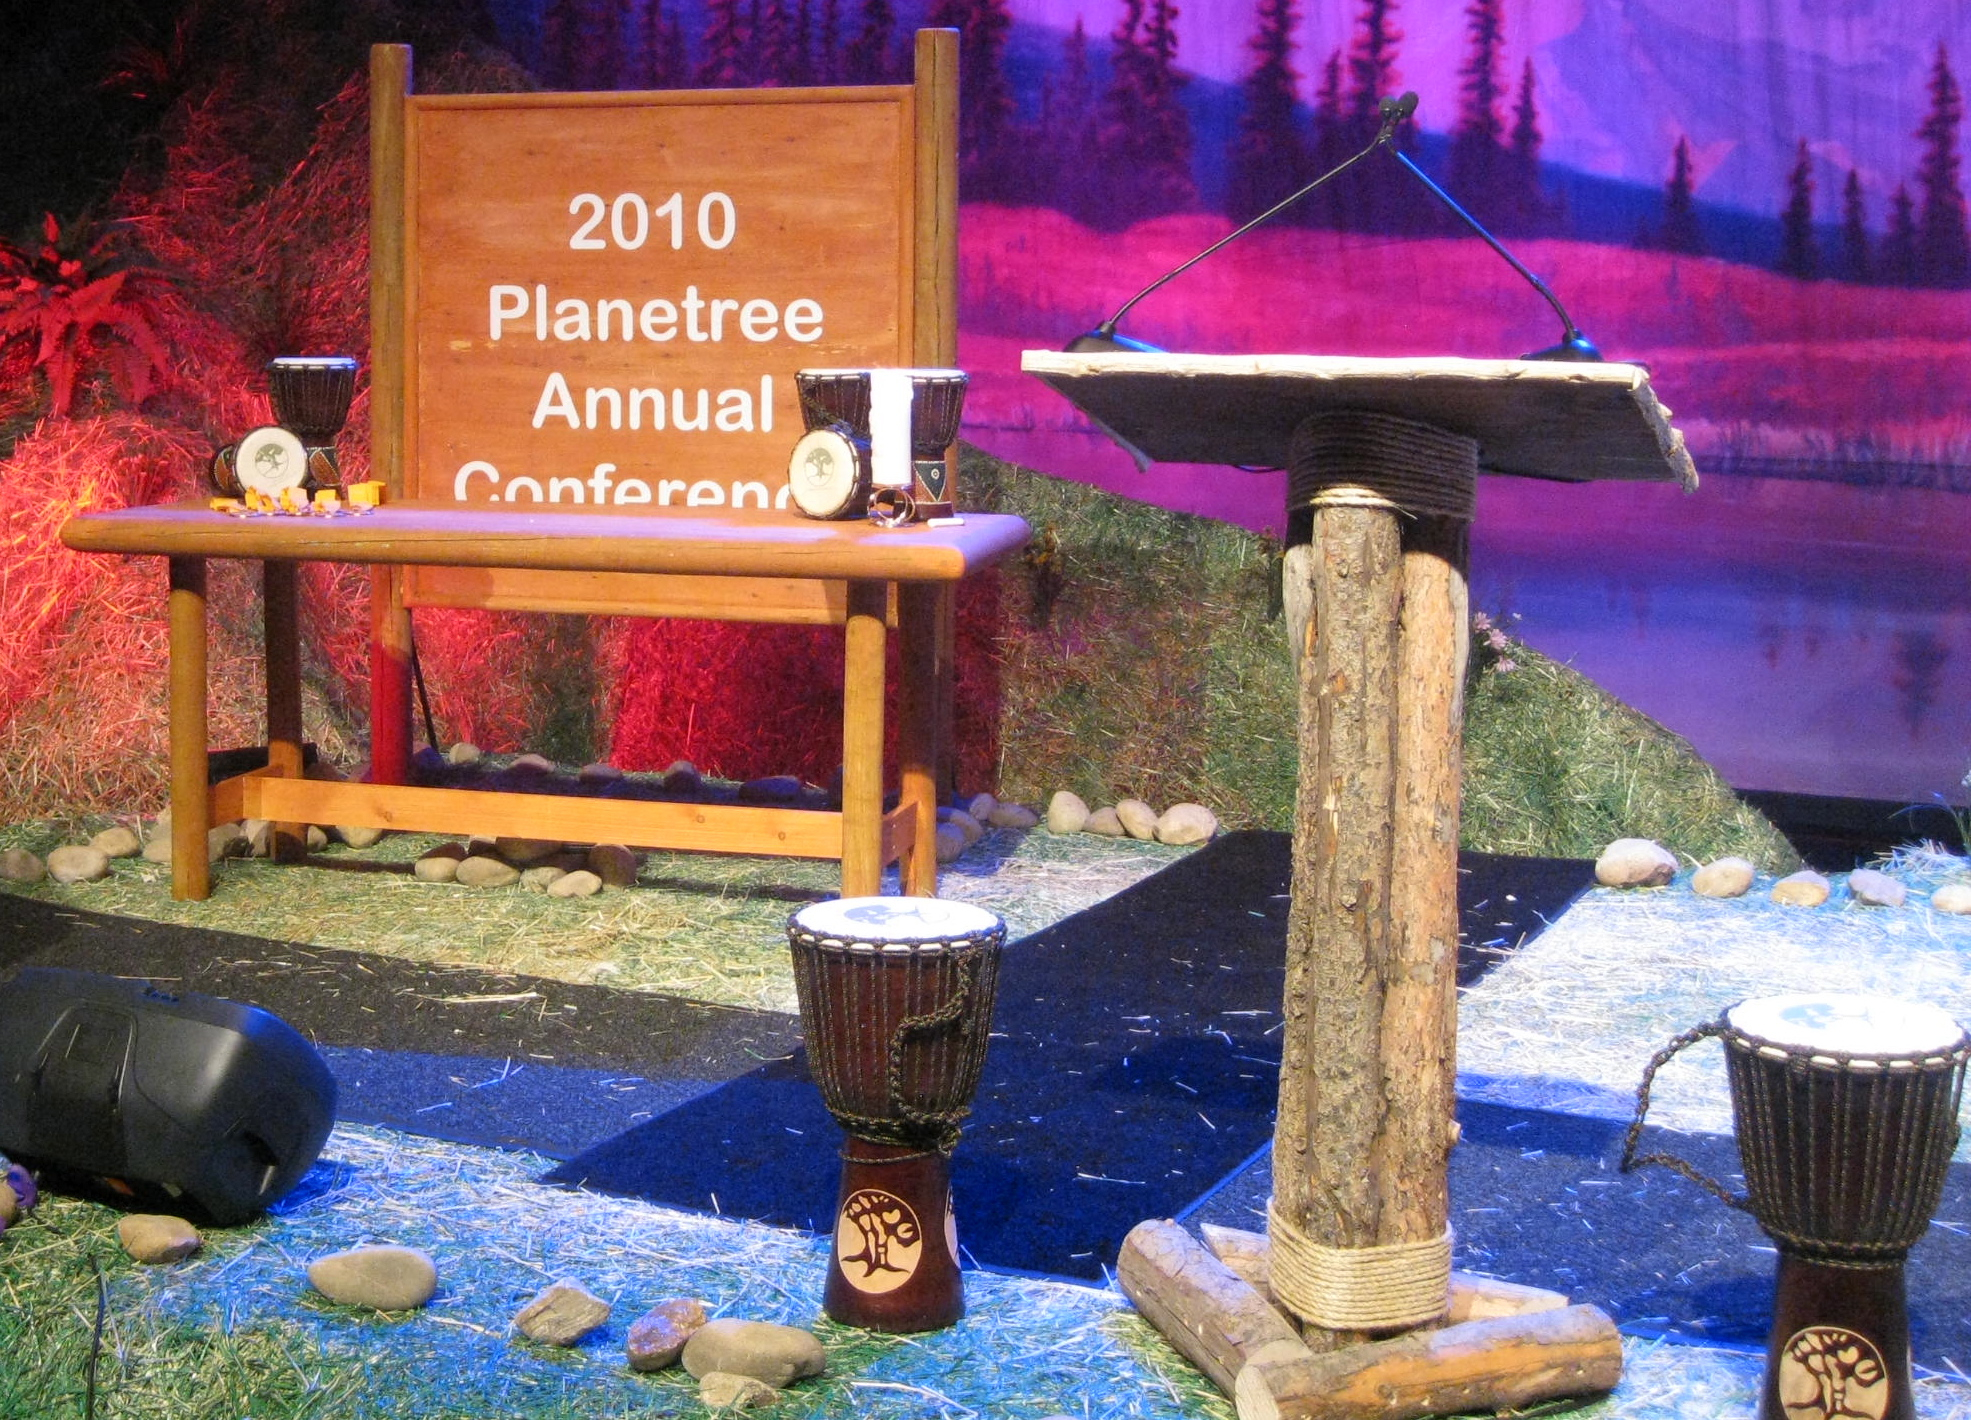 The Pine rental podium - lectern by You Want What? Productions INC